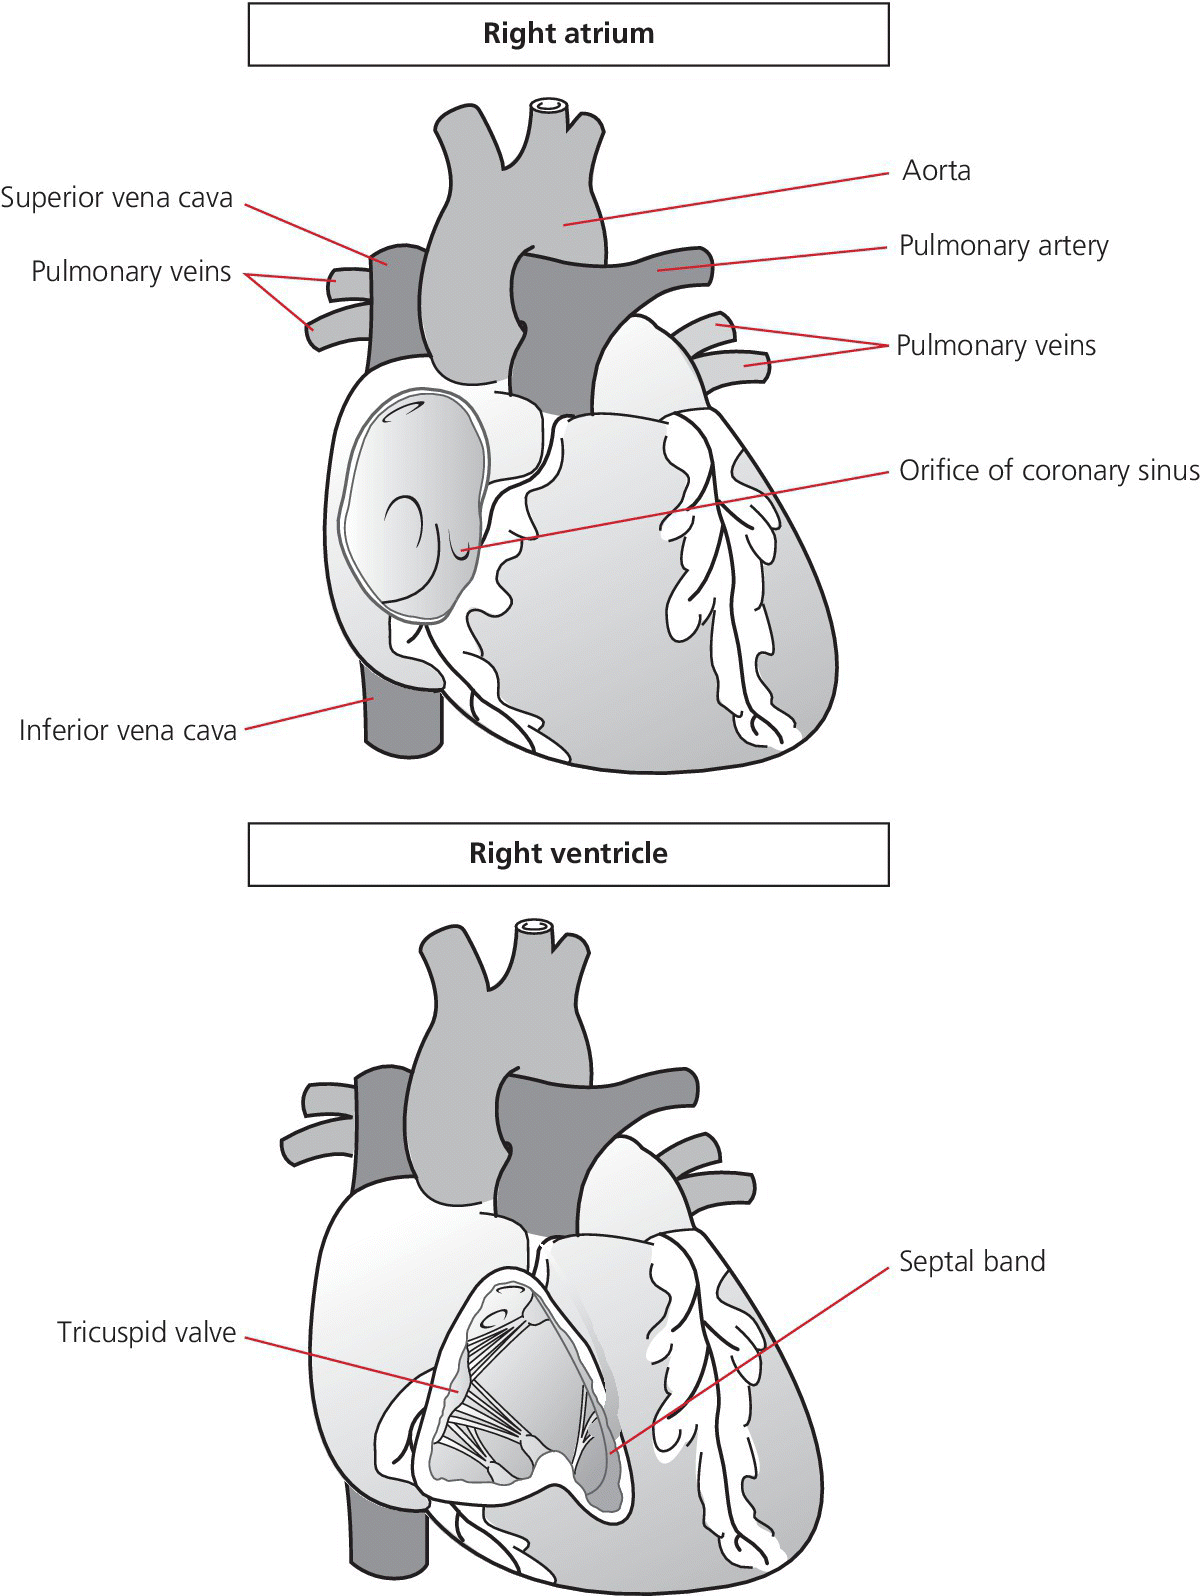 2 Illustrations of the heart displaying right atrium with lines depicting the aorta, pulmonary artery, pulmonary veins, etc. (top) and right ventricle with lines for the septal band and tricuspid valve (bottom).